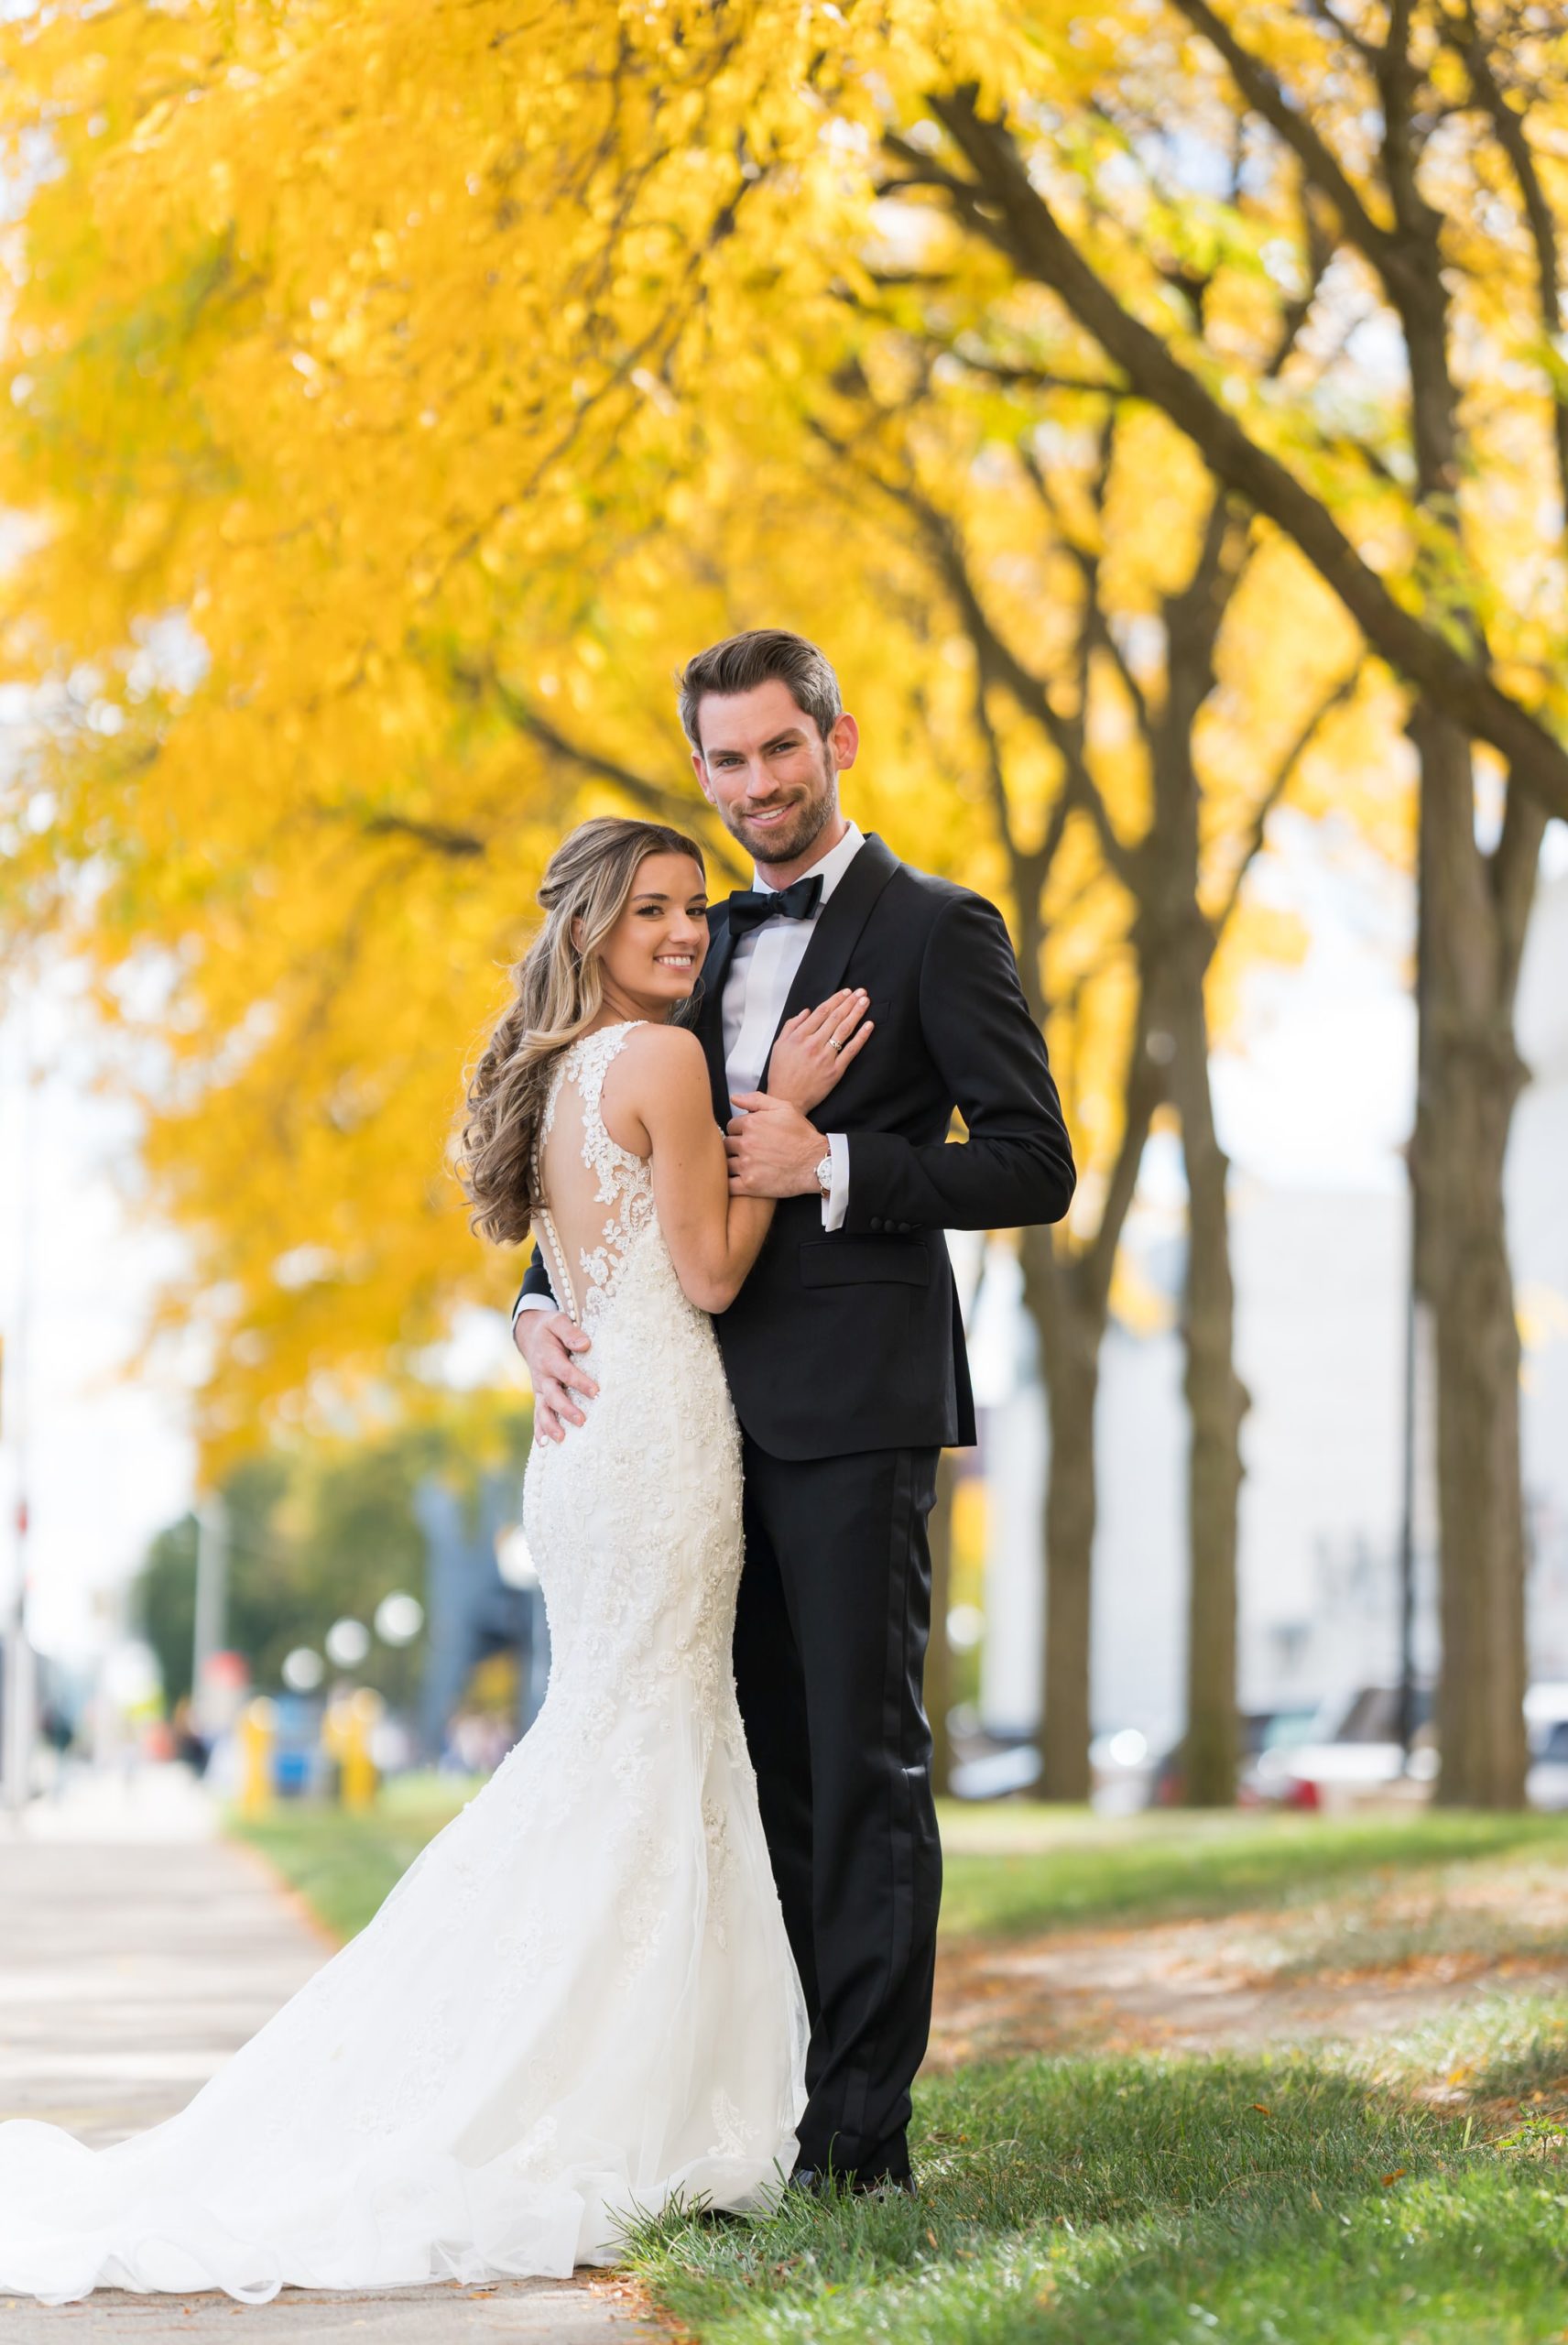 With her hand on his chest, a bride and groom pose with yellow trees in the background at the Detroit Institute of Art.